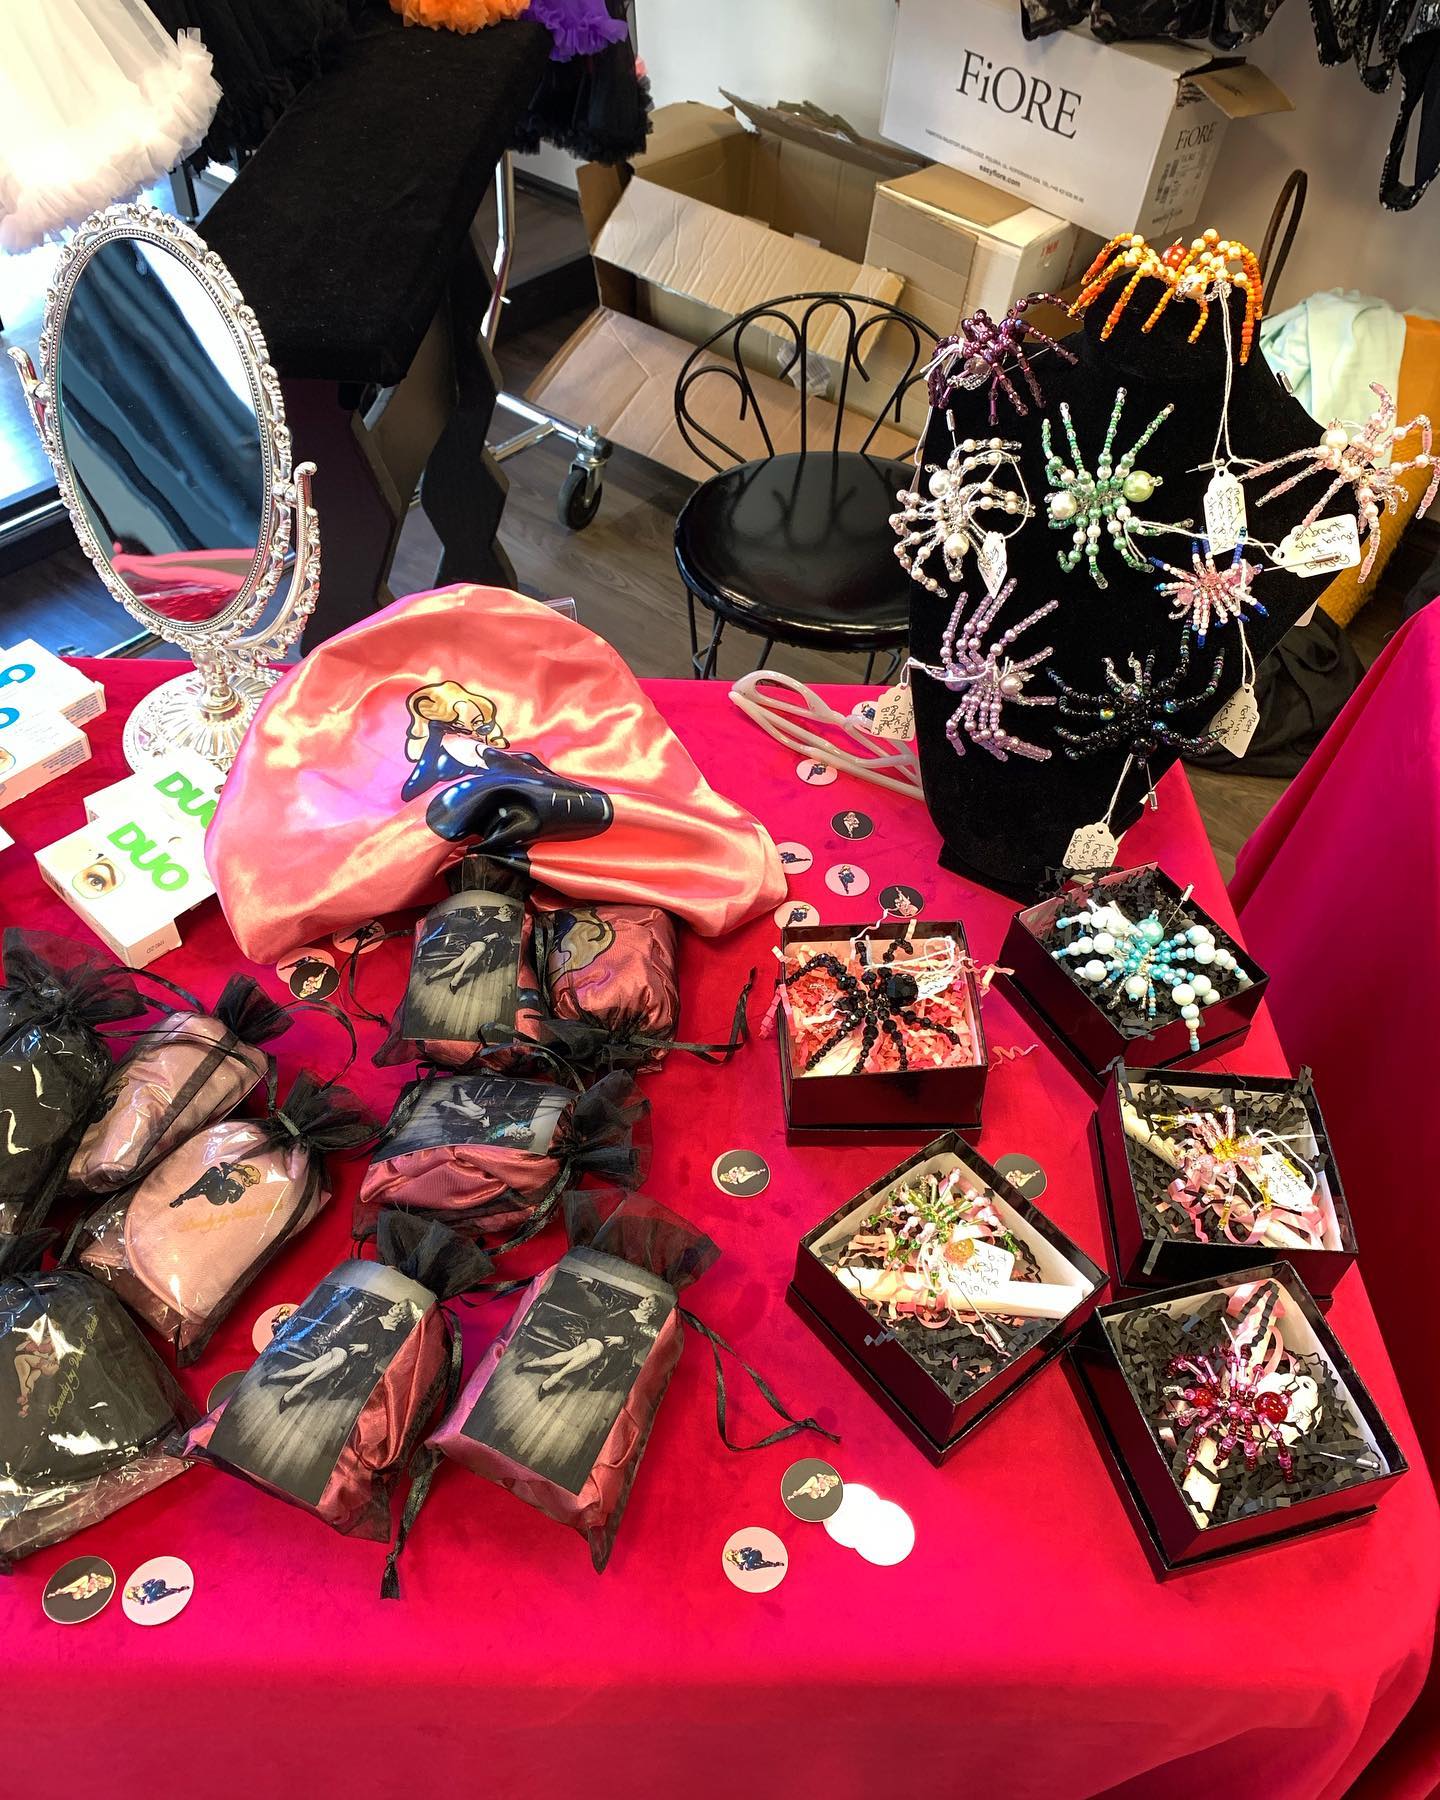 Come on down and see what’s up! #eyelashfashions #sleepmasks #hairbonnets #jewelleryspiders and more! At @pinupcanada at 434 West Hastings St. From 12noon to 5pm 💞🖤💞